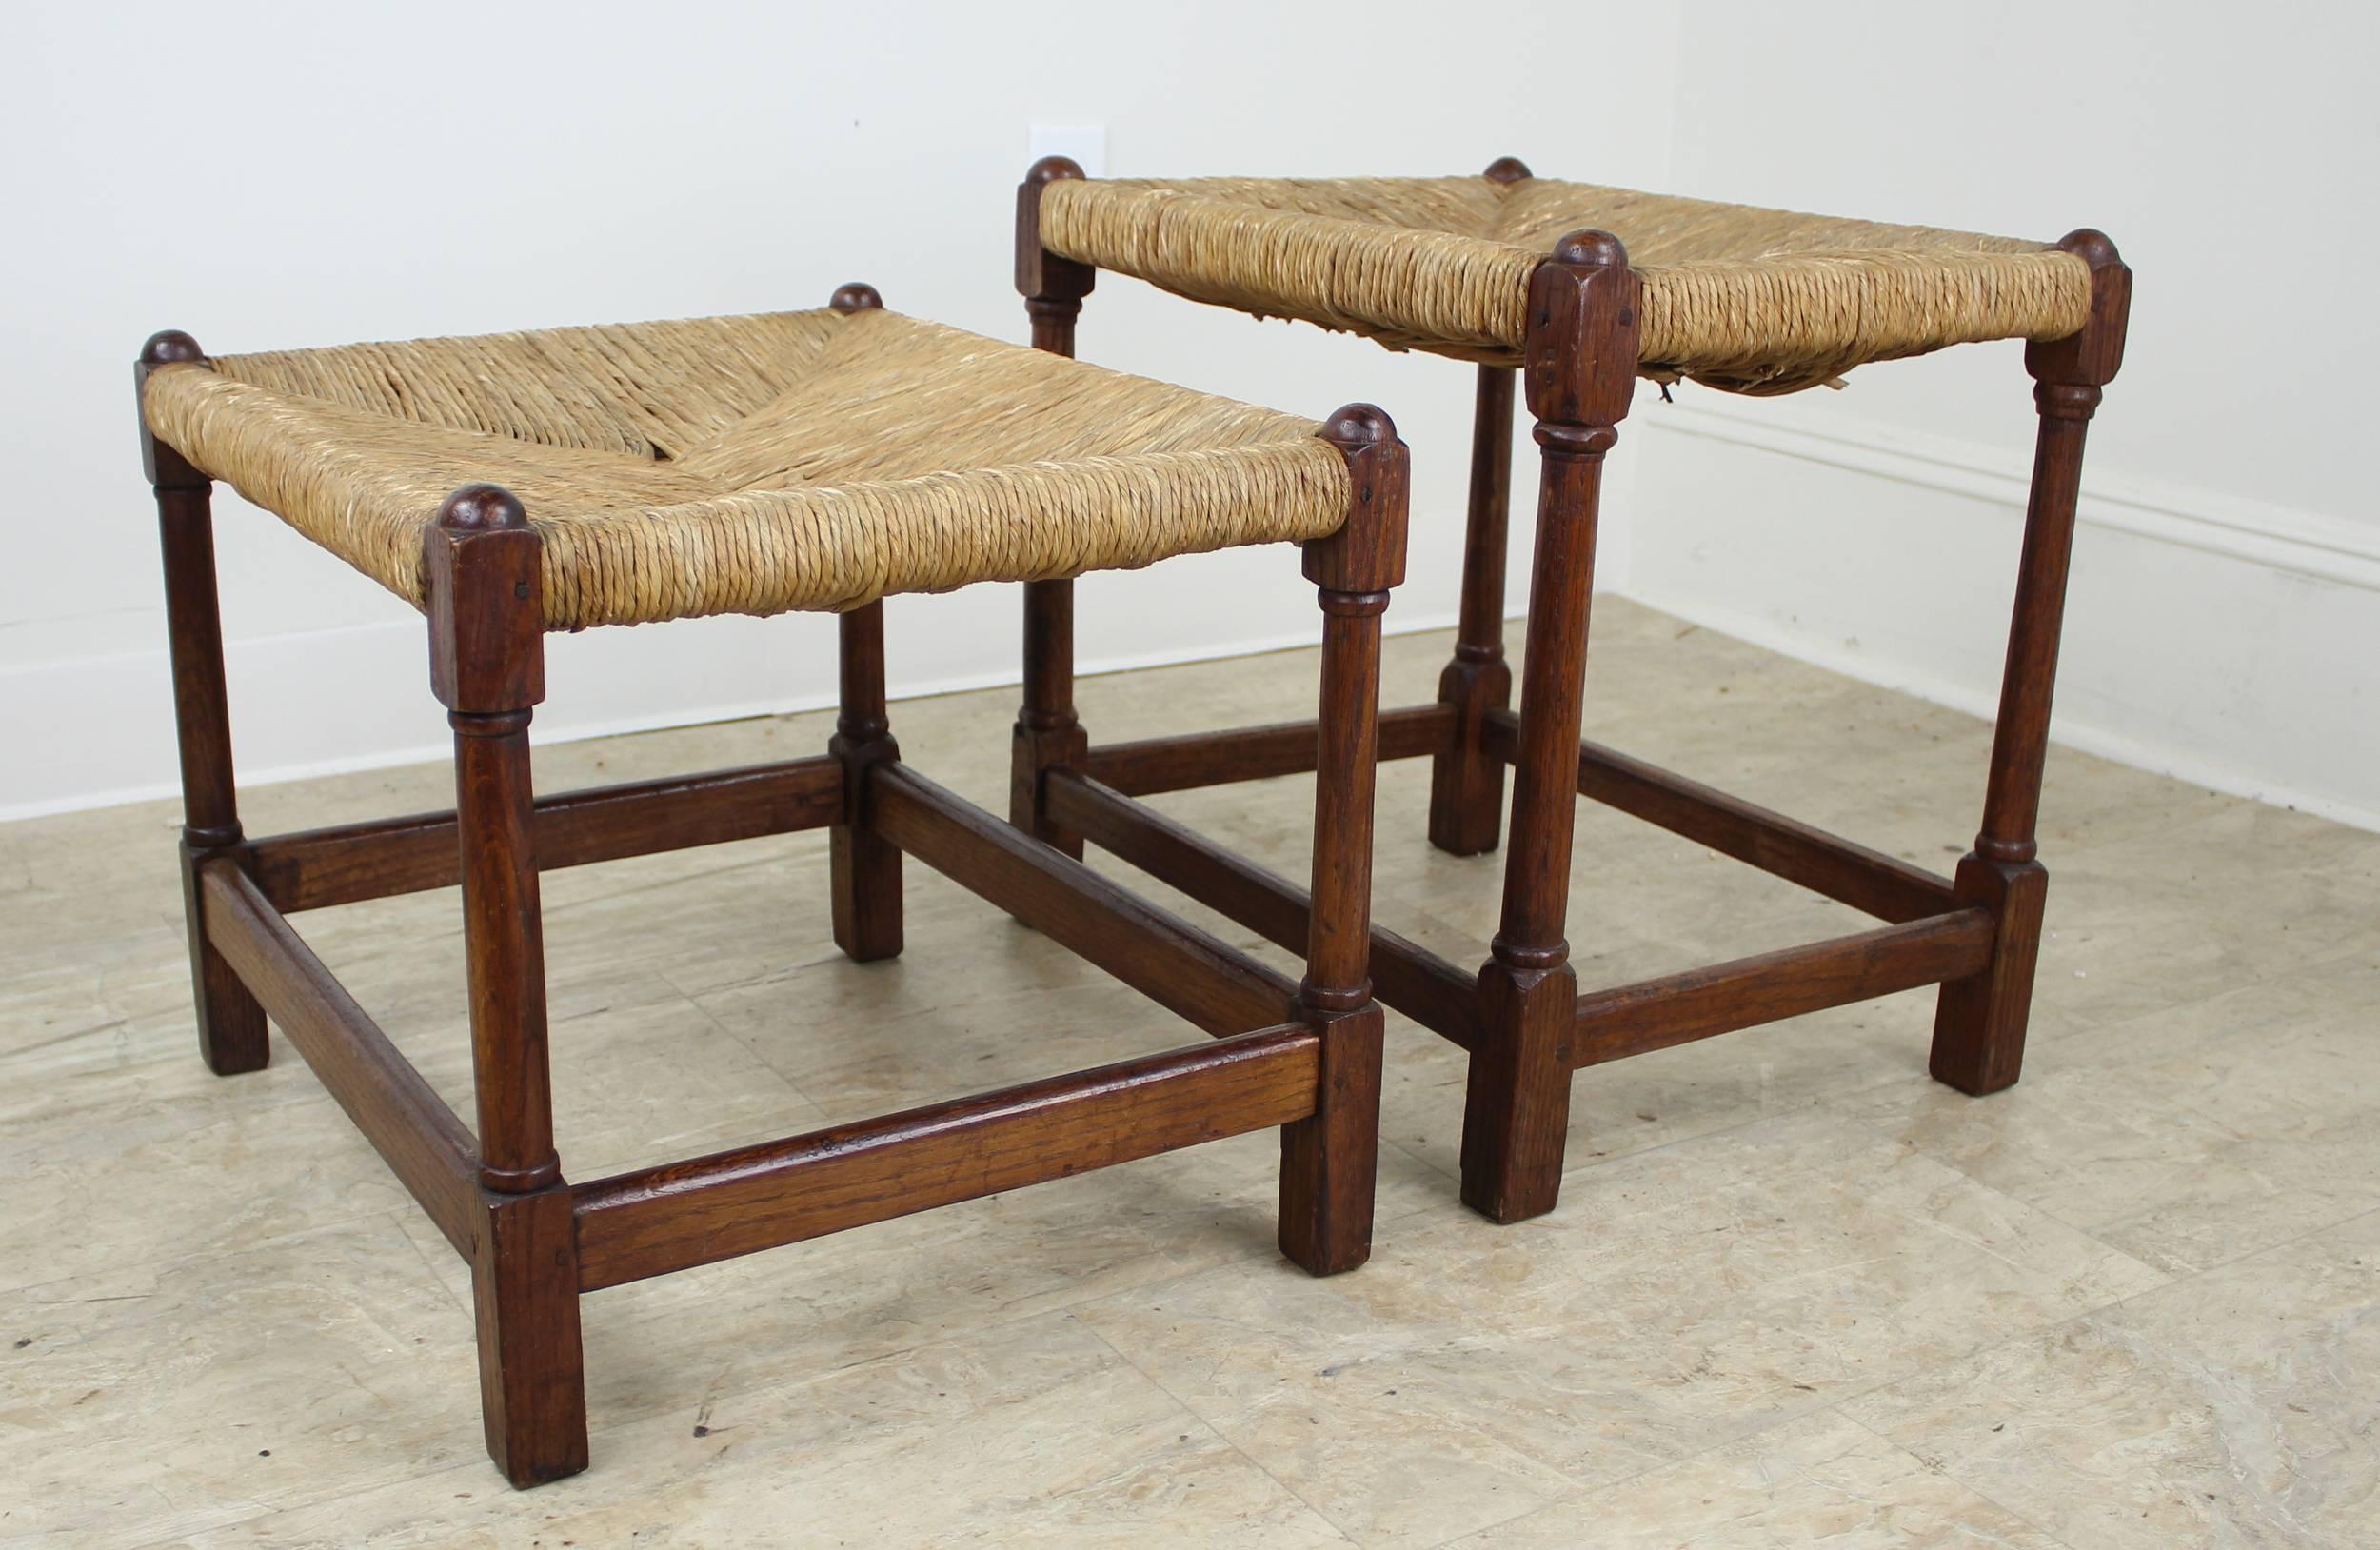 A pair of sweet little oak rush-seated stools for the hallway, living room, child's bedroom, or as perches on either side of the fireplace. Measurement below is for the taller stool. The smaller one measures 19 inches wide by 15.75 inches deep by 15